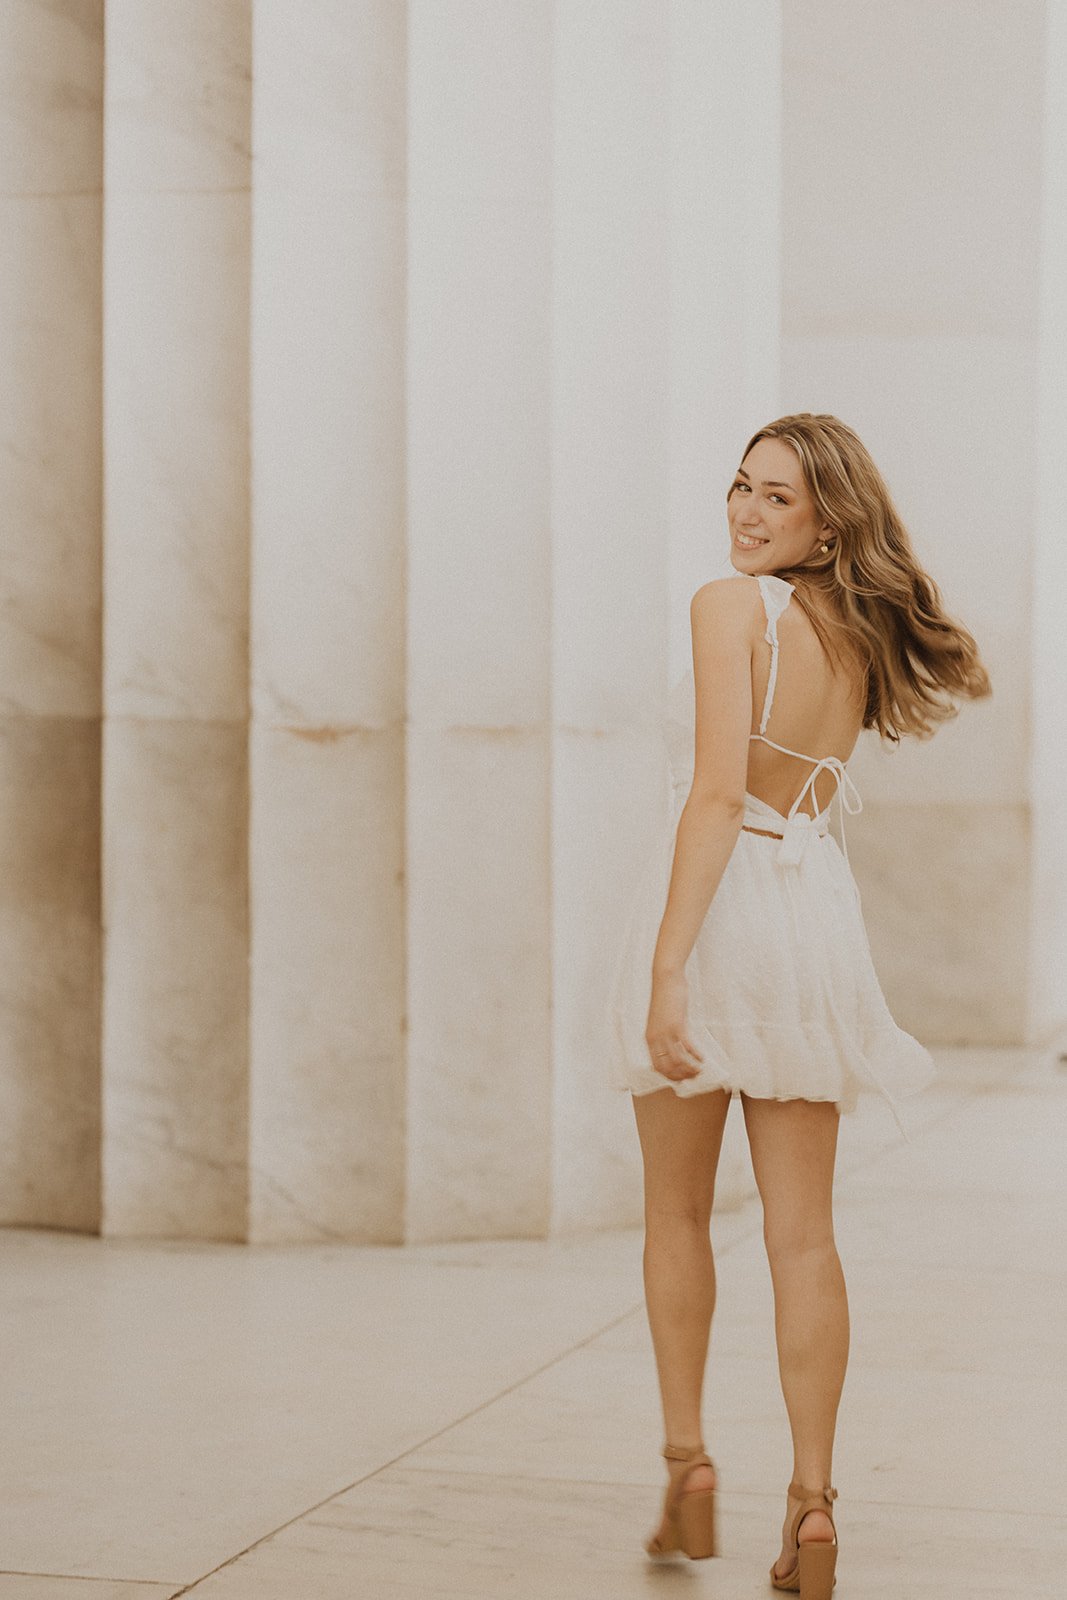 Senior Portraits at The National Mall in Washington, D.C.-7